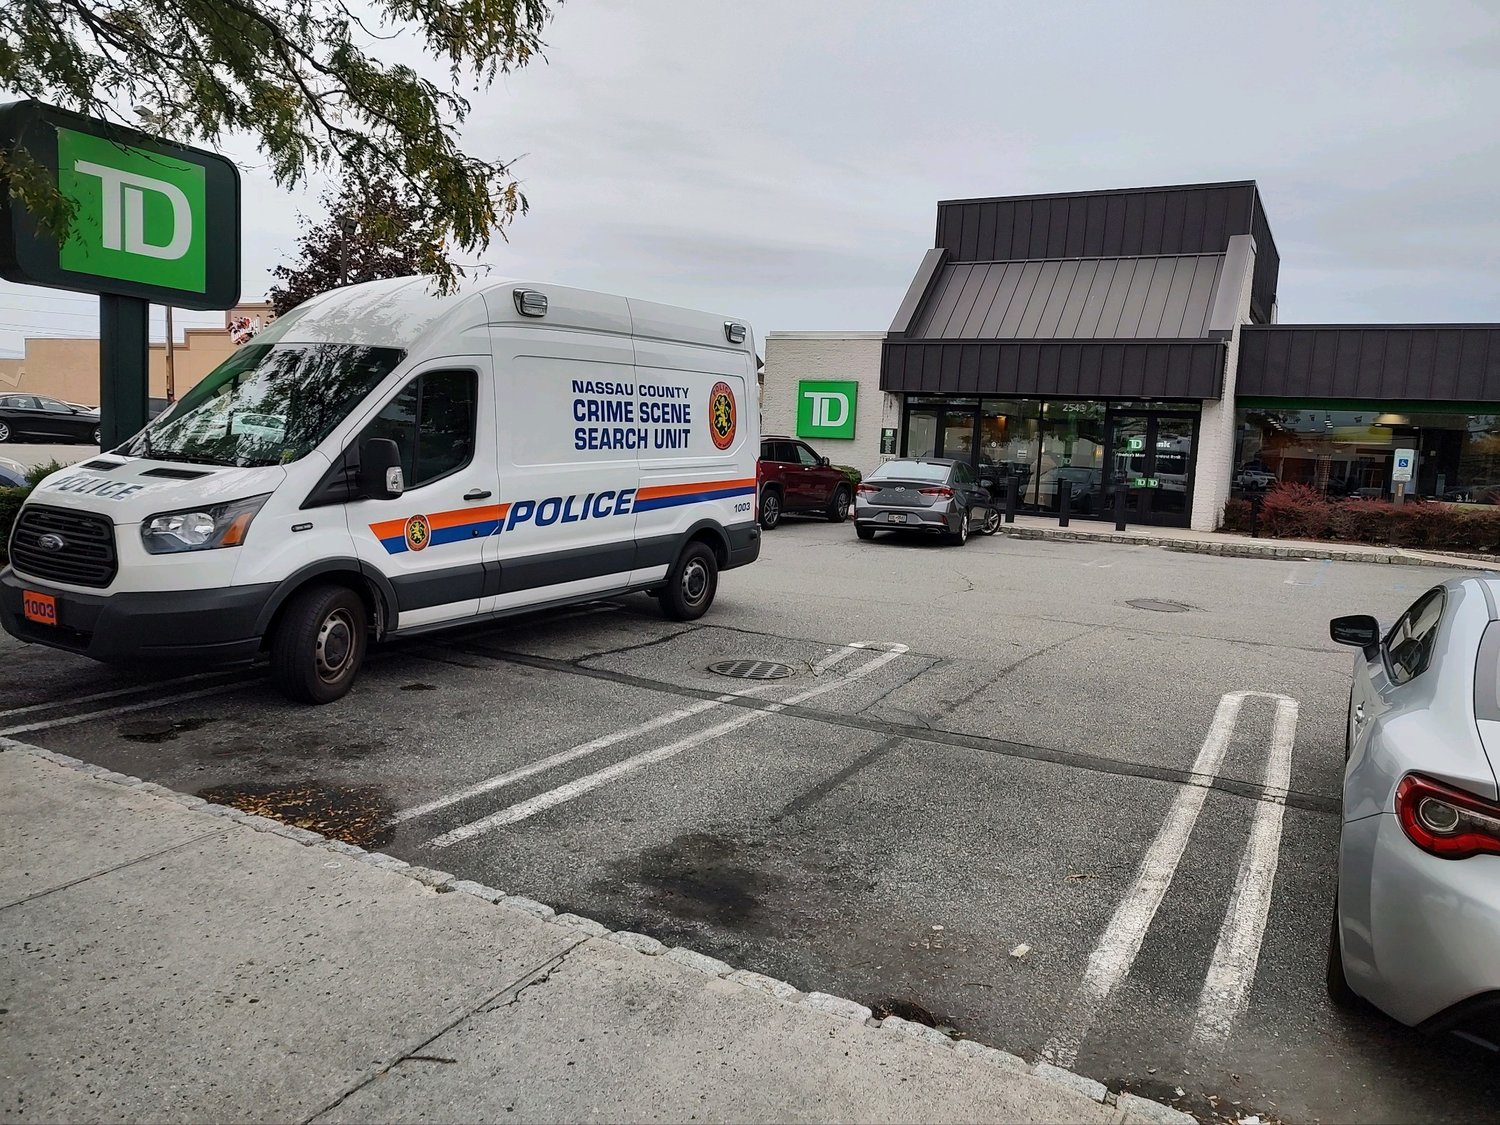 Police were seen outside of the TD Bank on Hempstead Turnpike in East Meadow after an unknown man robbed the bank and fled on Sunday.